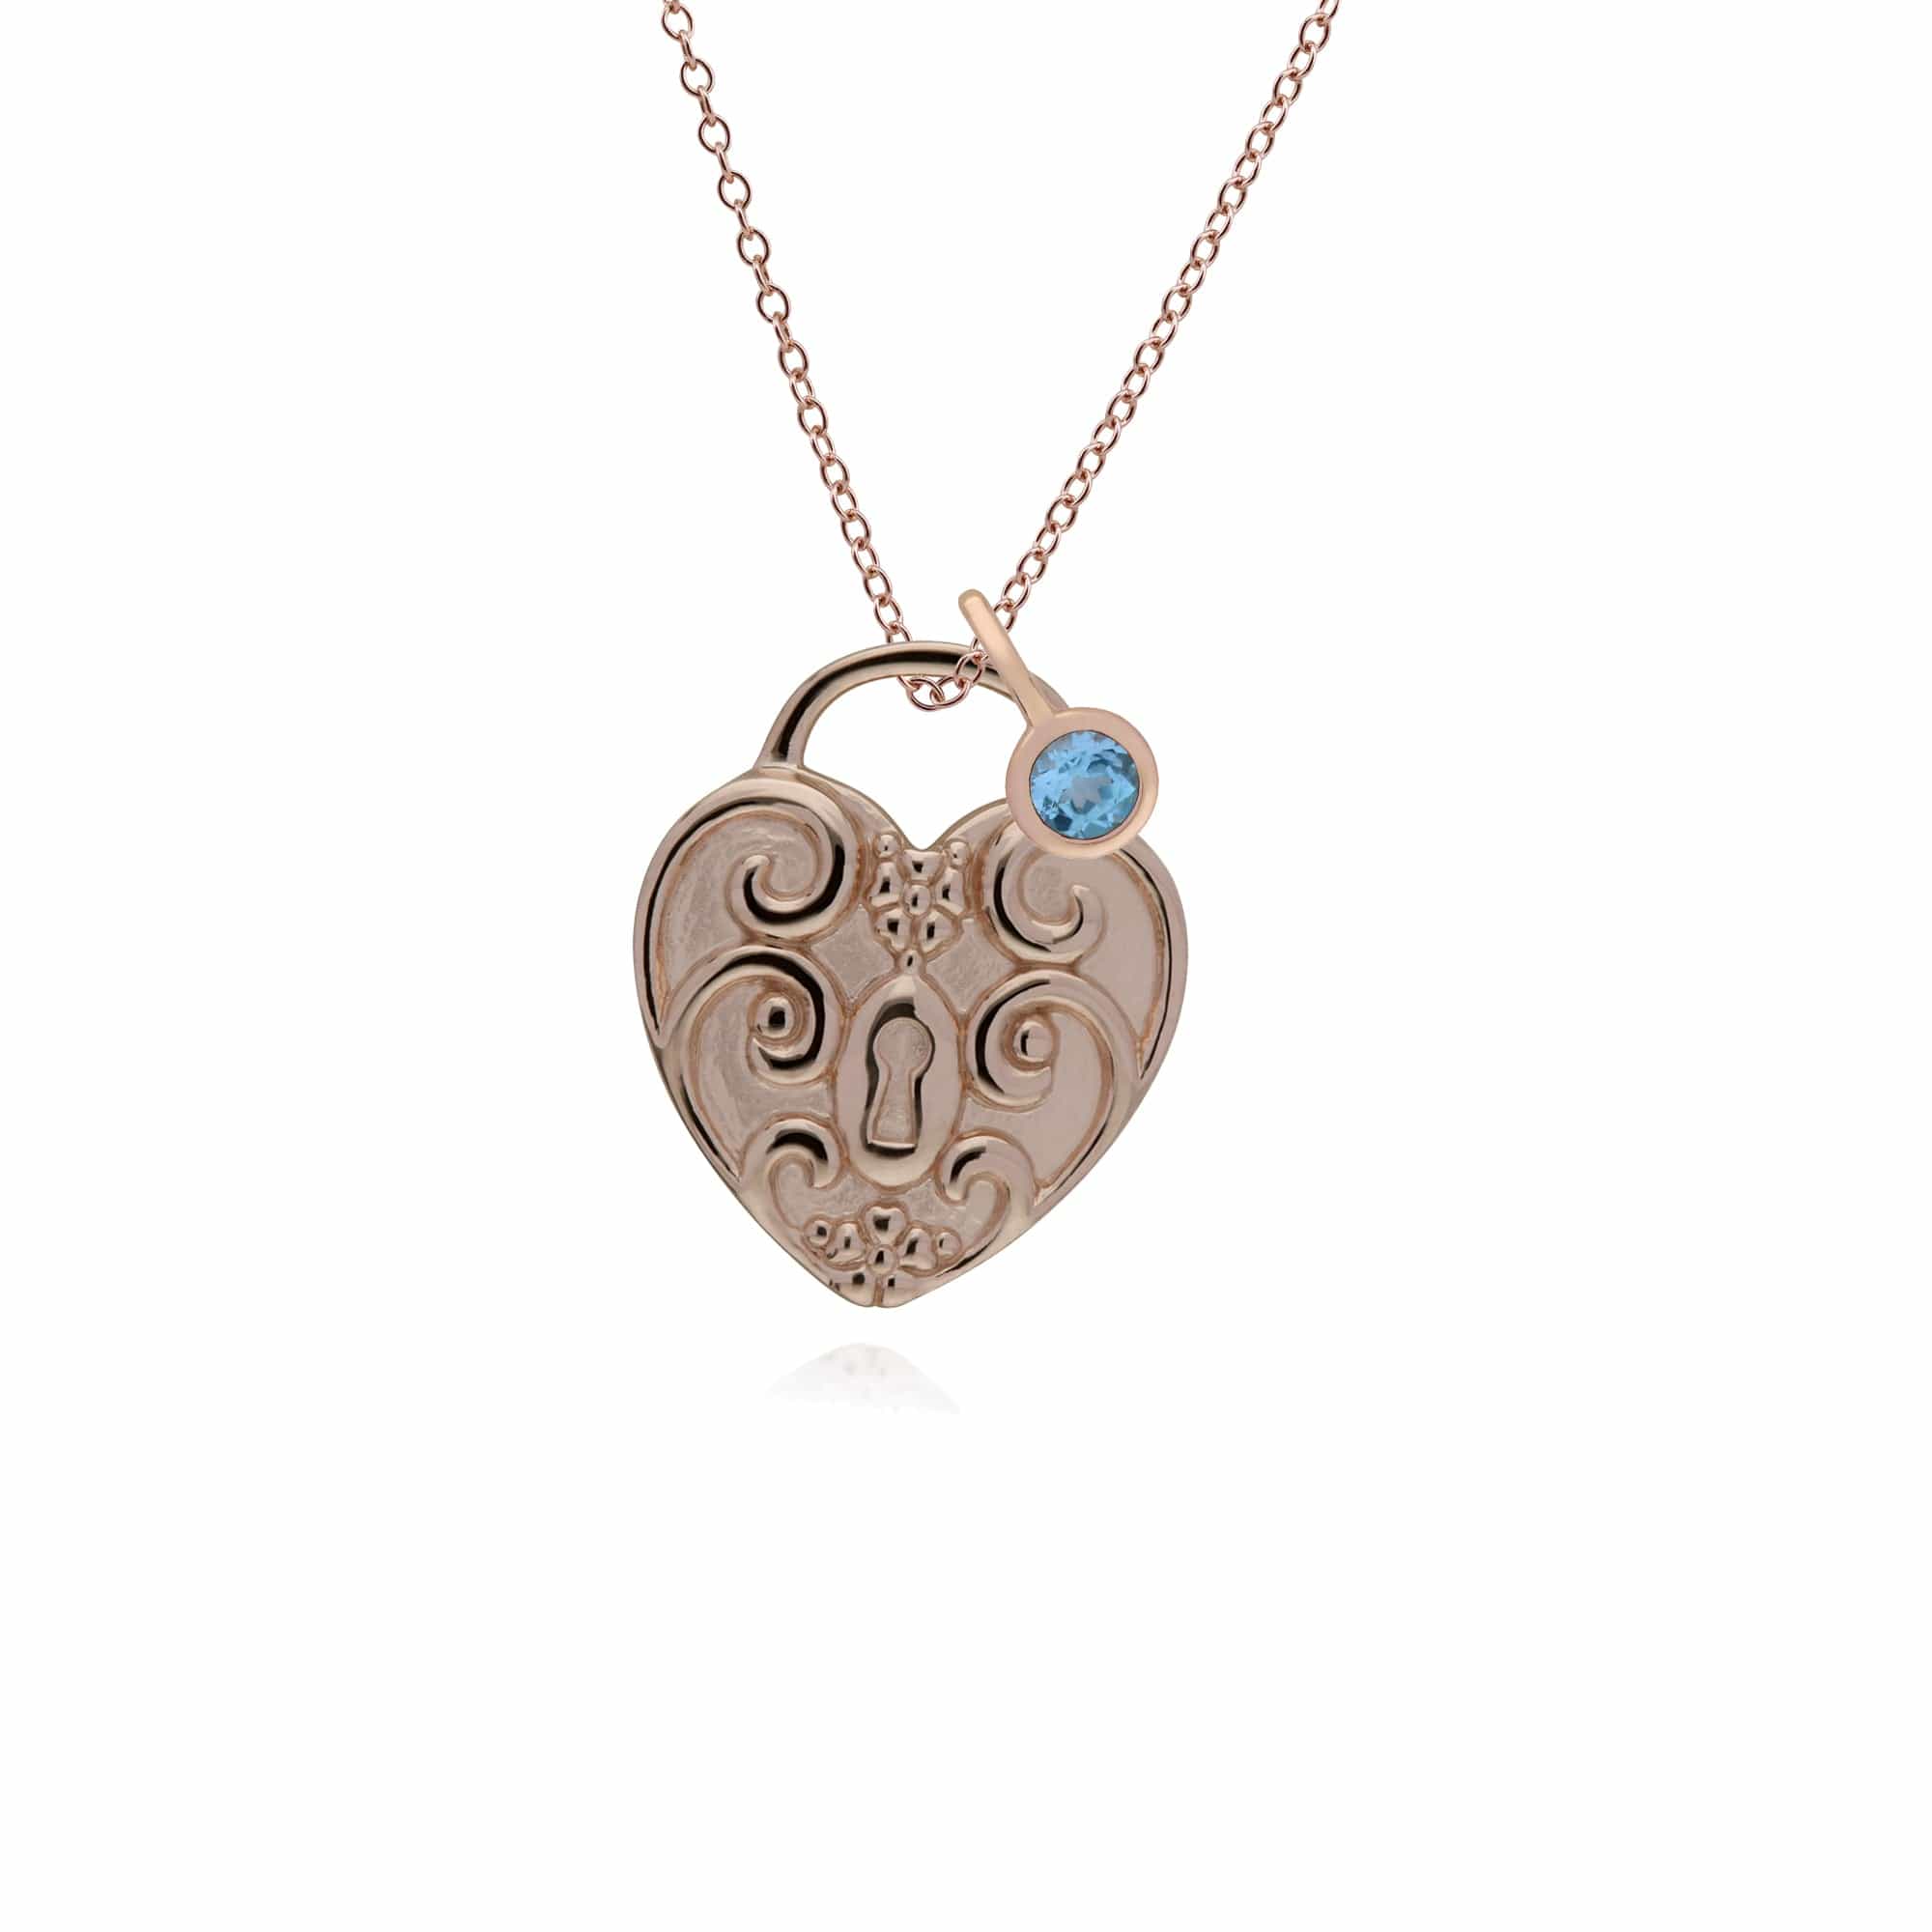 270P027303925-270P026501925 Classic Swirl Heart Lock Pendant & Blue Topaz Charm in Rose Gold Plated 925 Sterling Silver 1